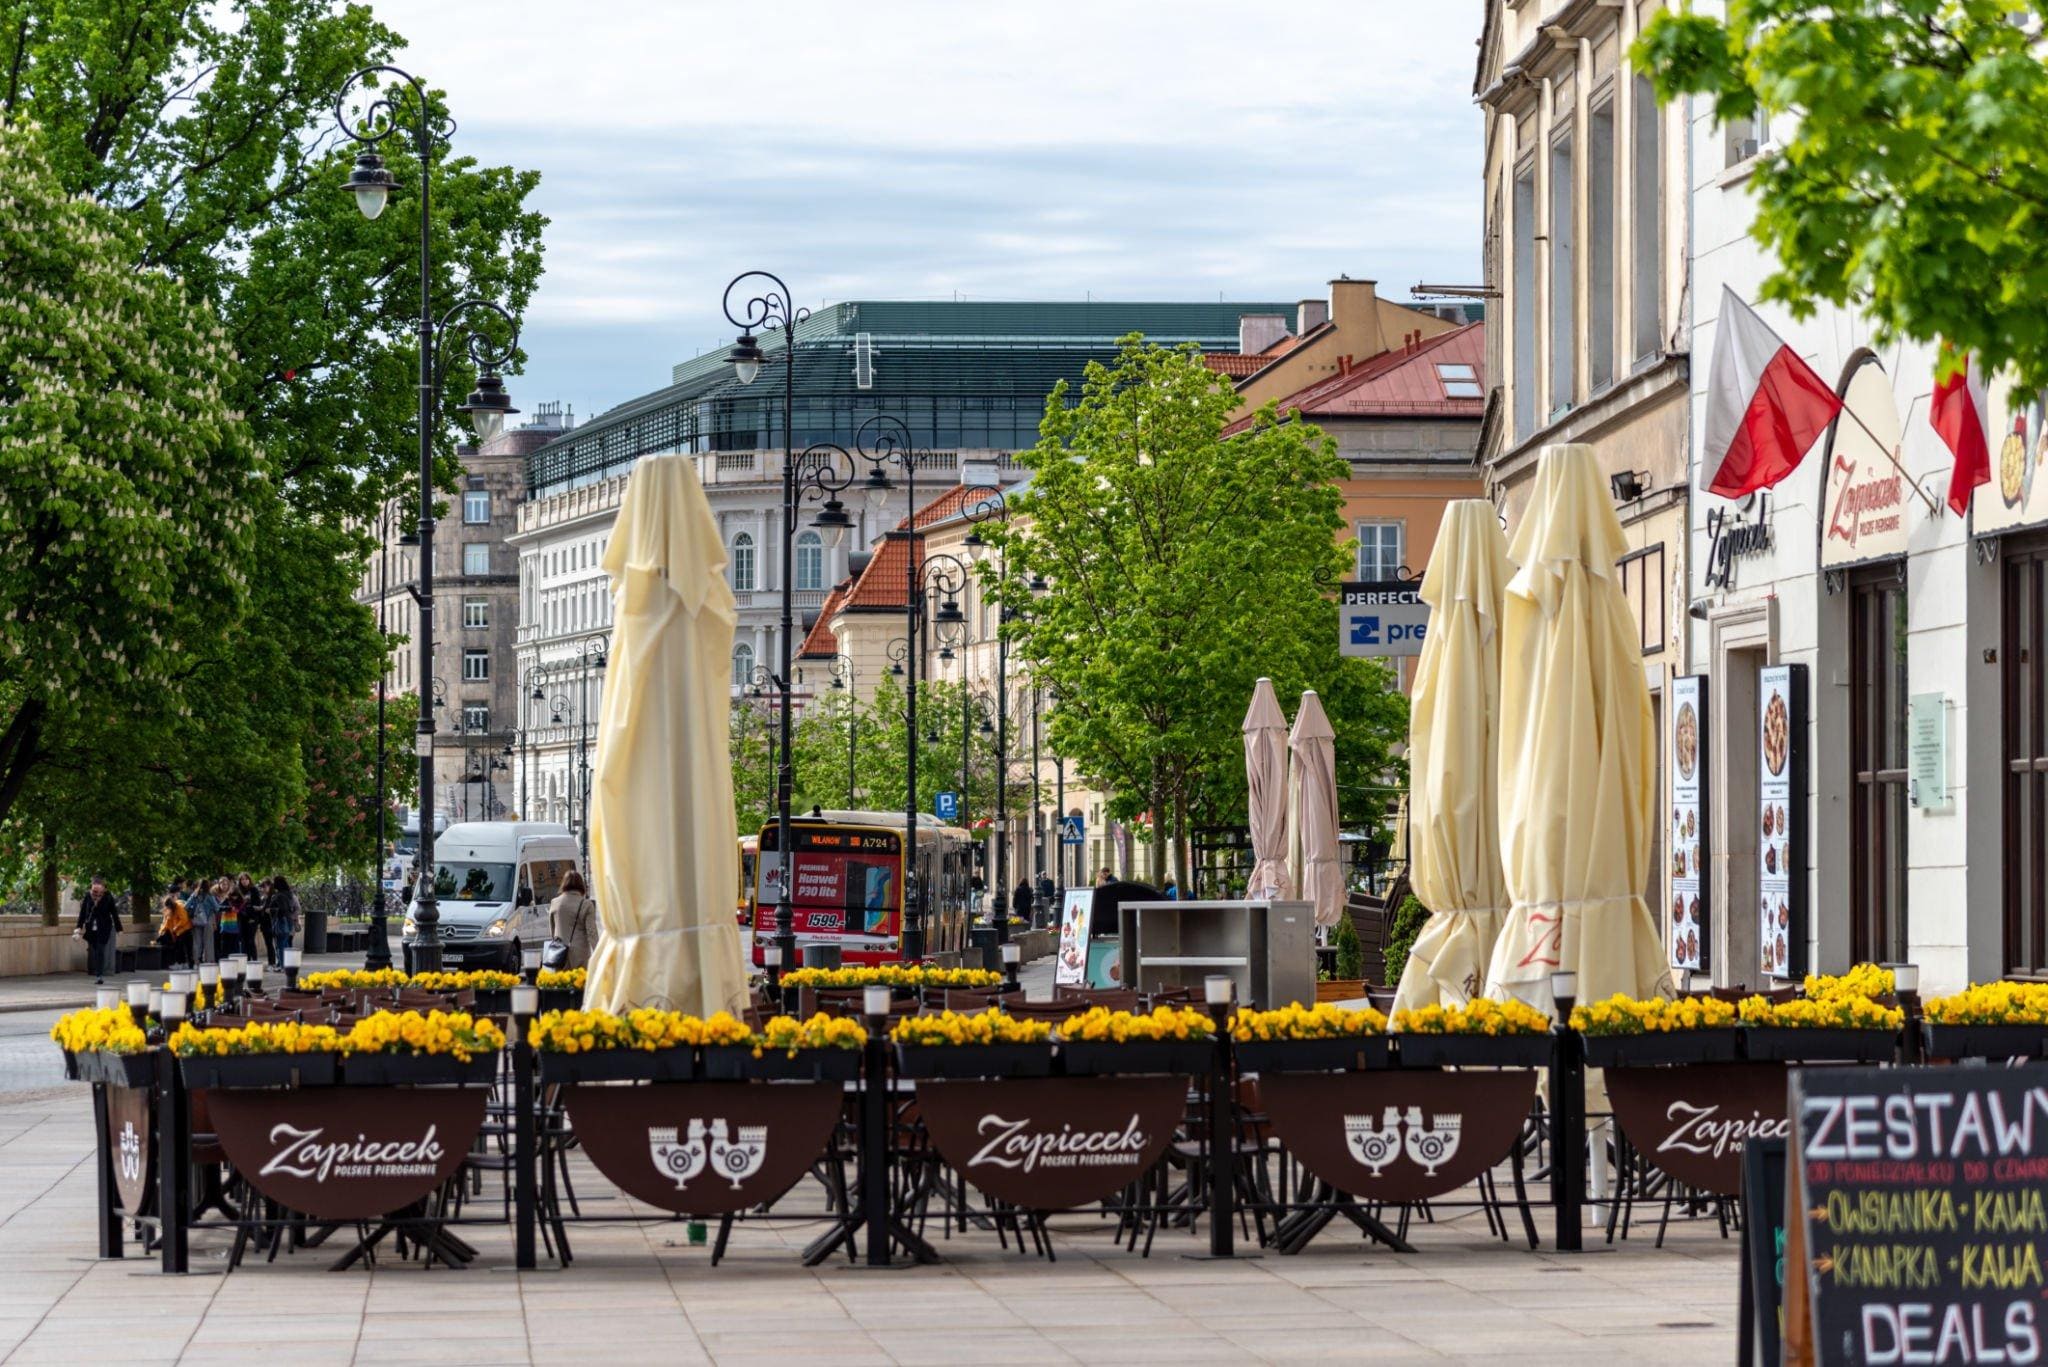 What to pay attention to when choosing an establishment in Warsaw?